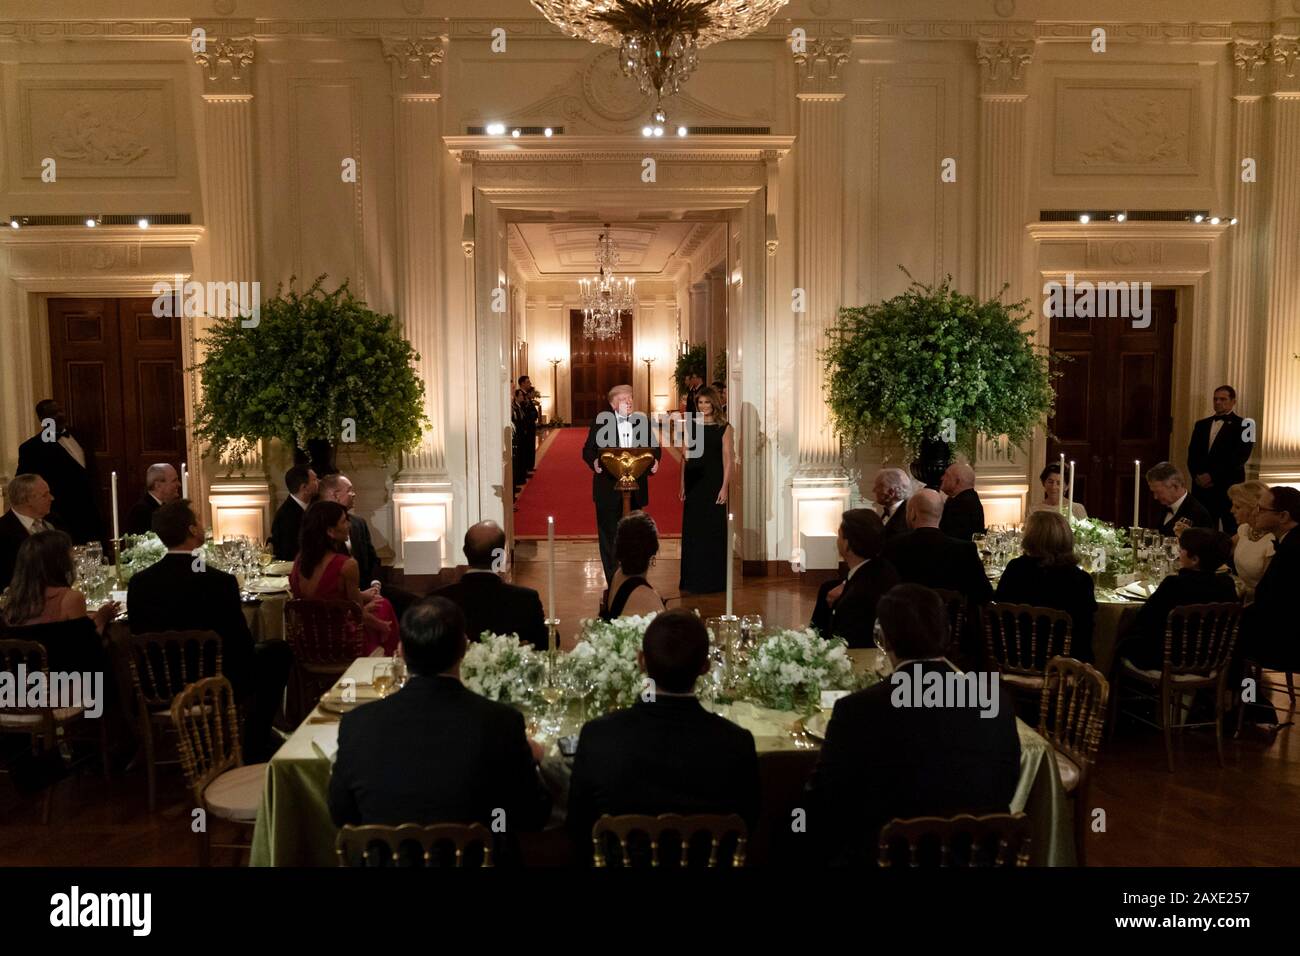 U.S President Donald Trump and First Lady Melania Trump address remarks during the Governors Ball in the East Room of the White House February 9, 2020 in Washington, DC. Stock Photo